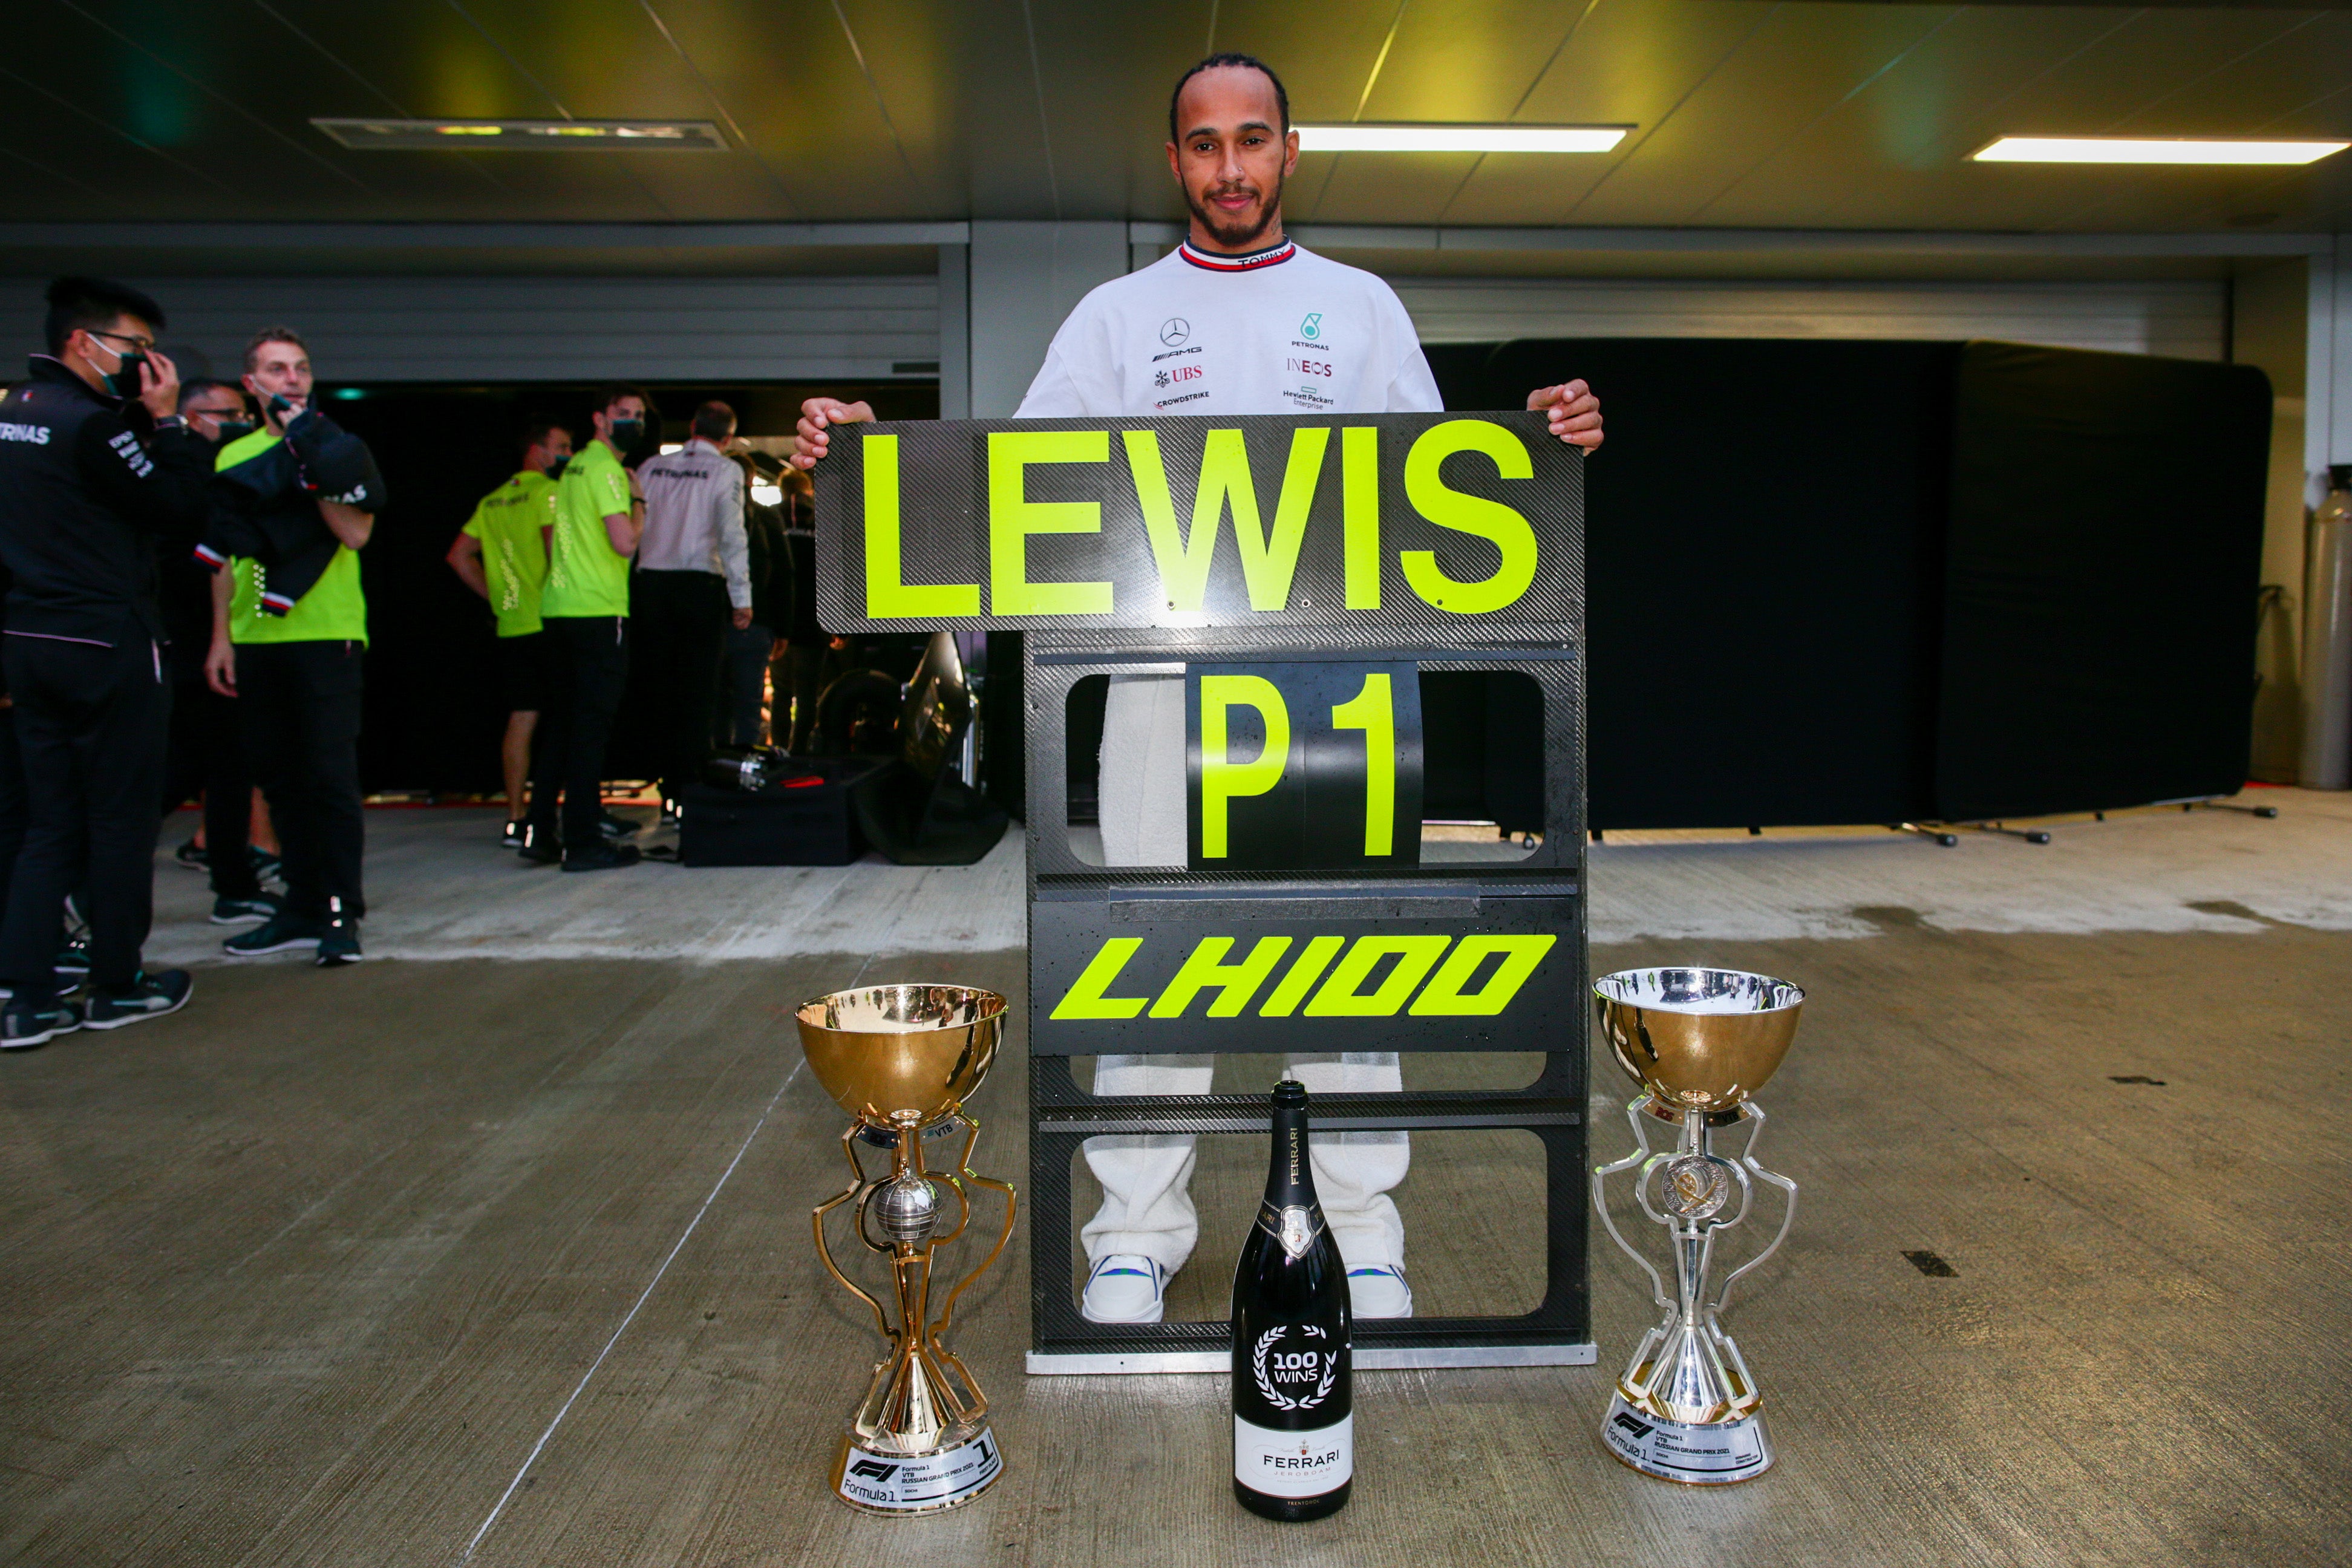 Lewis Hamilton won his 100th race at the Russian Grand Prix